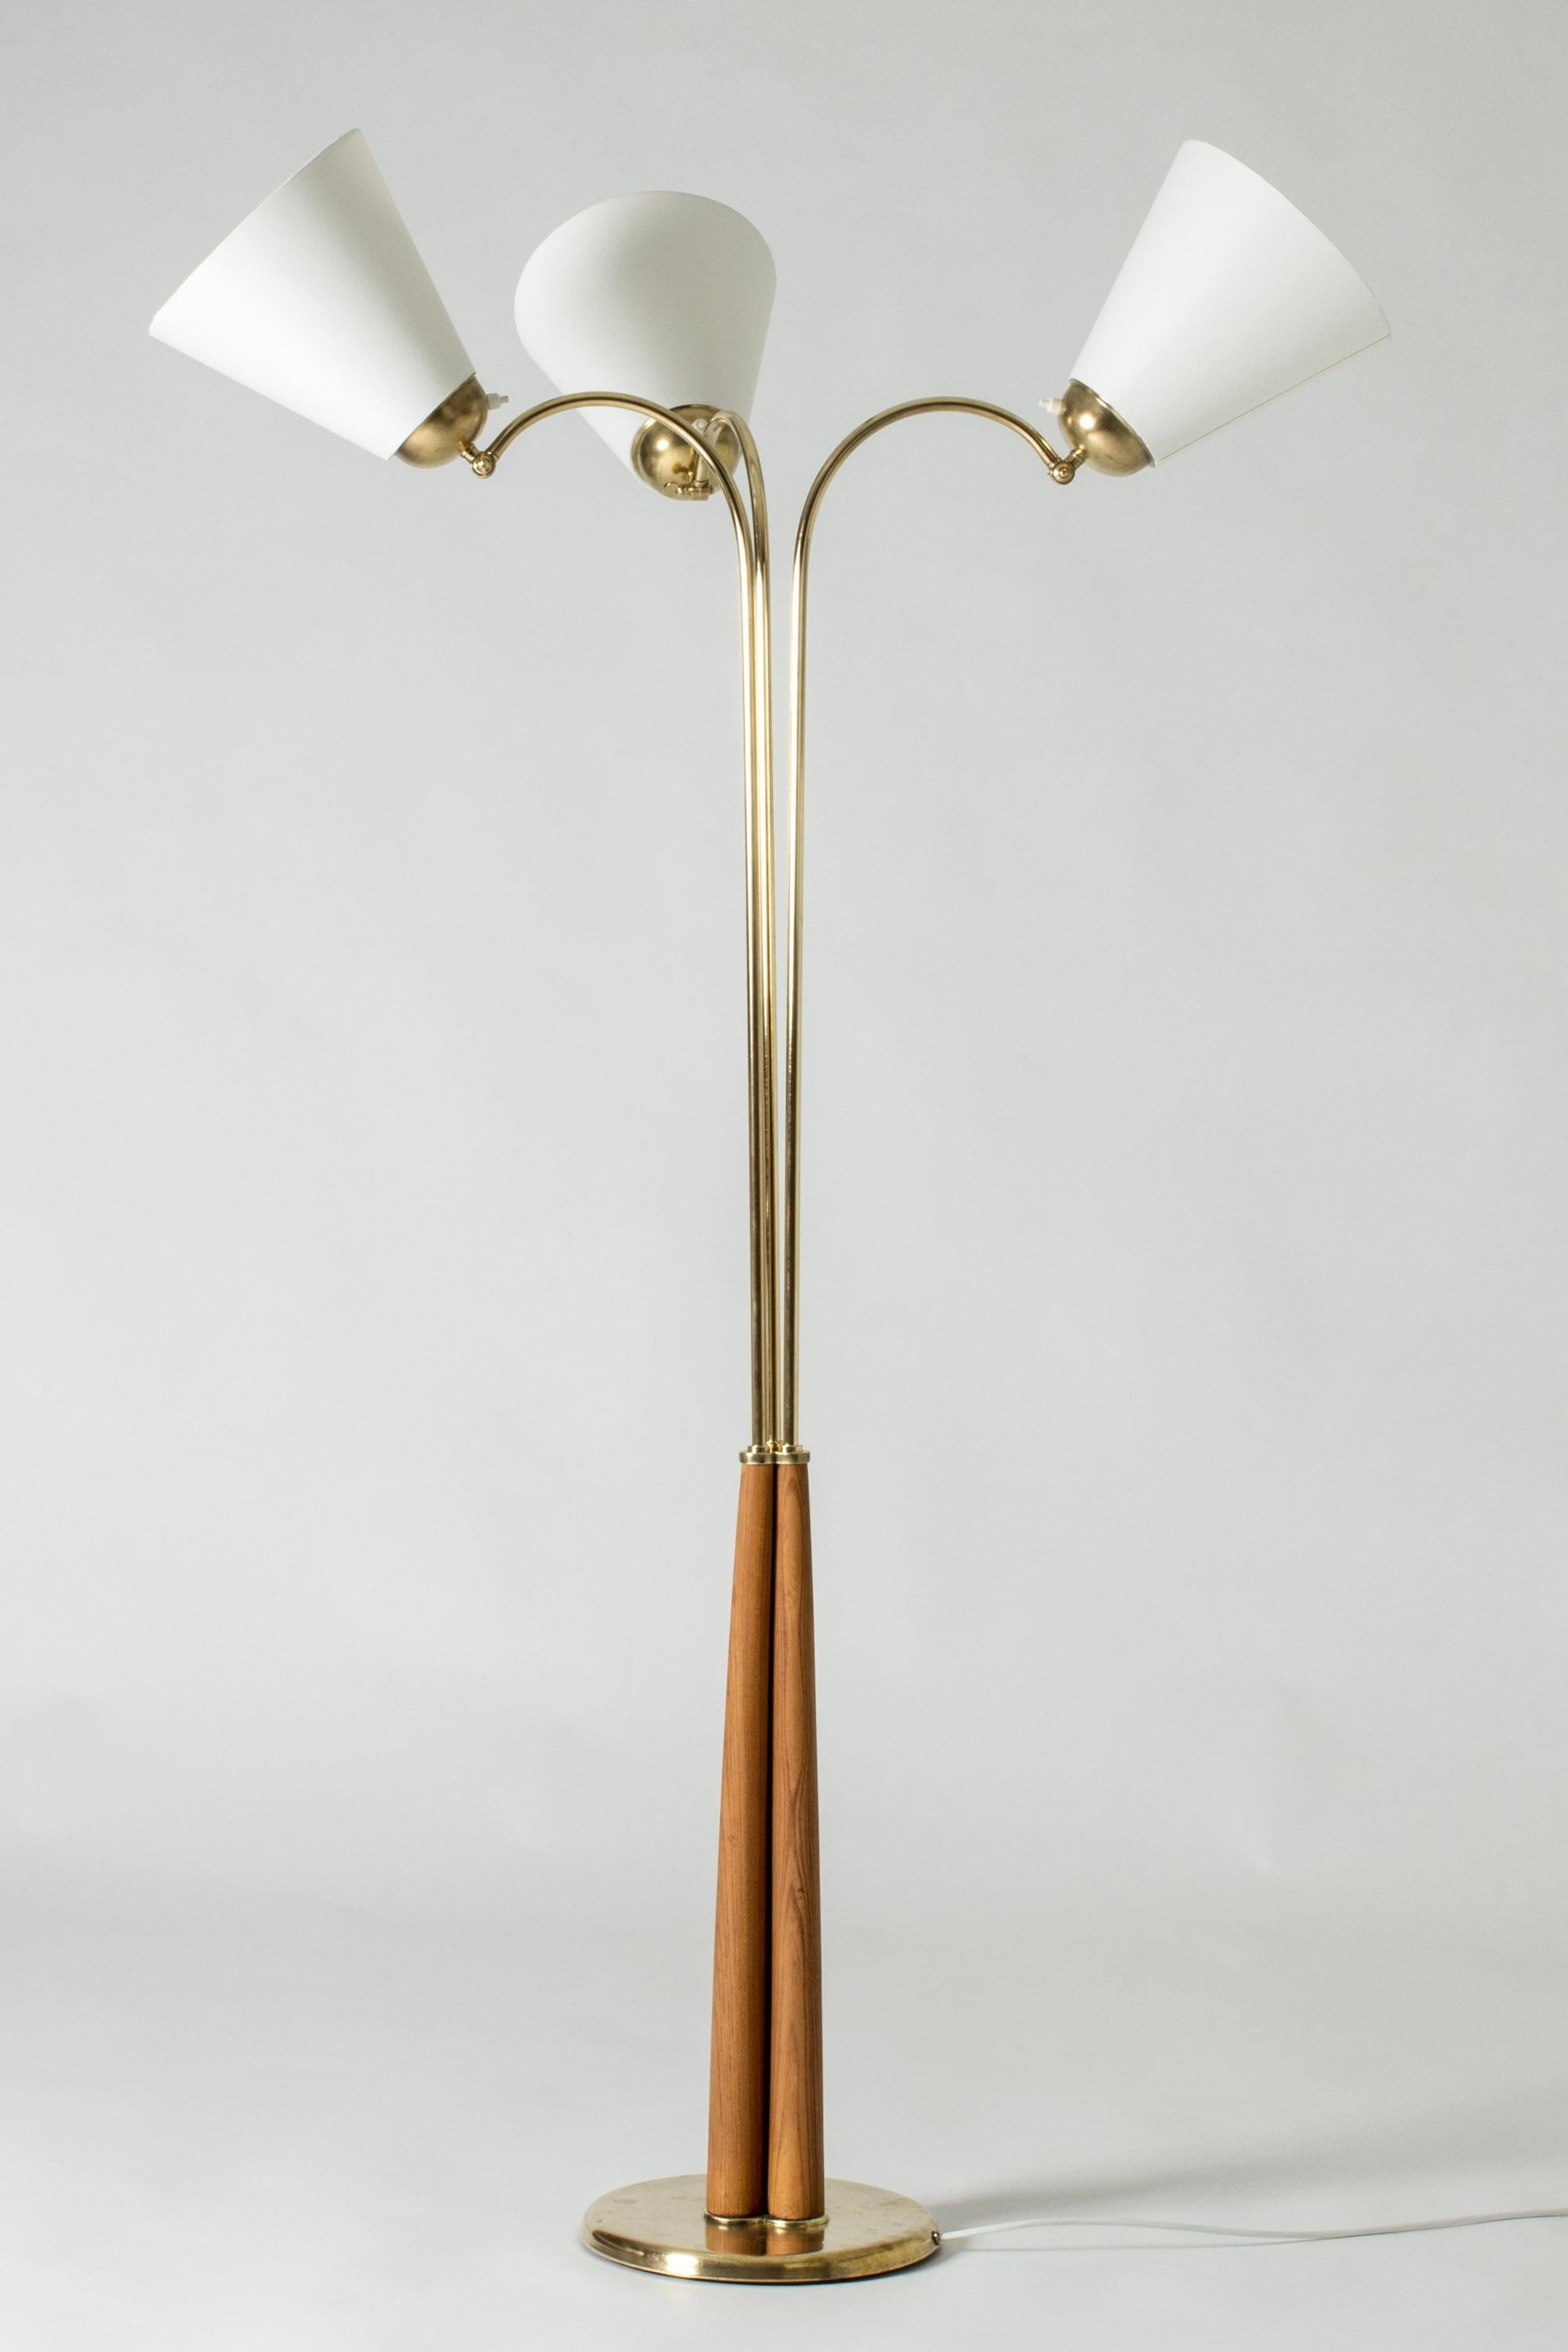 Elegant Swedish Modern floor lamp, made from brass with three lamp shades. Tapering wooden base with nice woodgrain. The direction of the lamp shades can be adjusted.